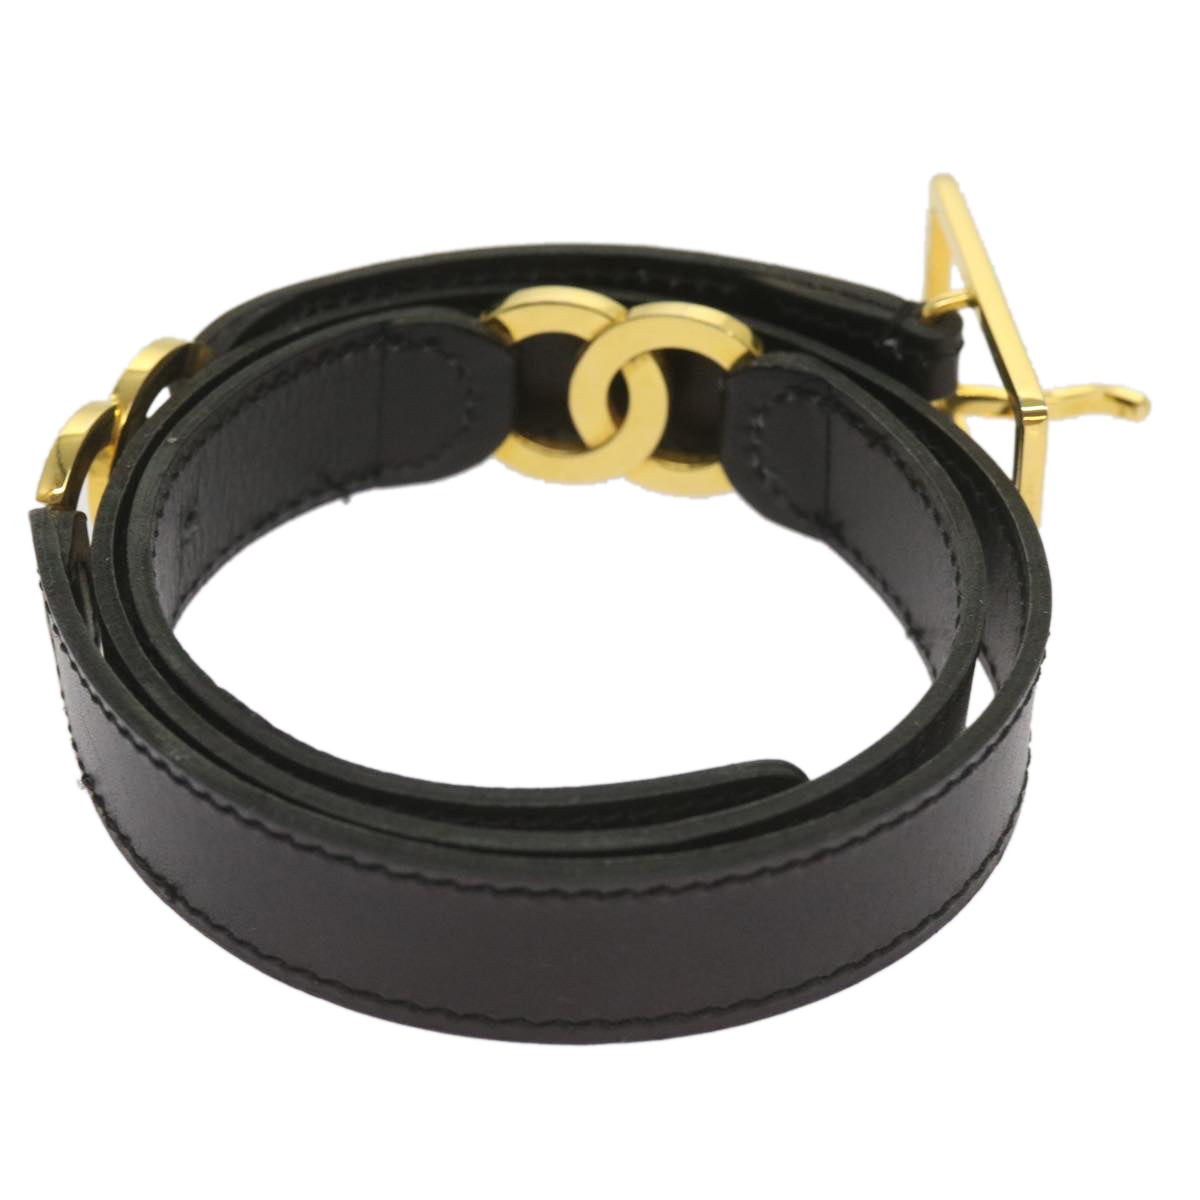 CHANEL COCO Mark Belt Leather 28"" Black CC Auth 68326 - 0